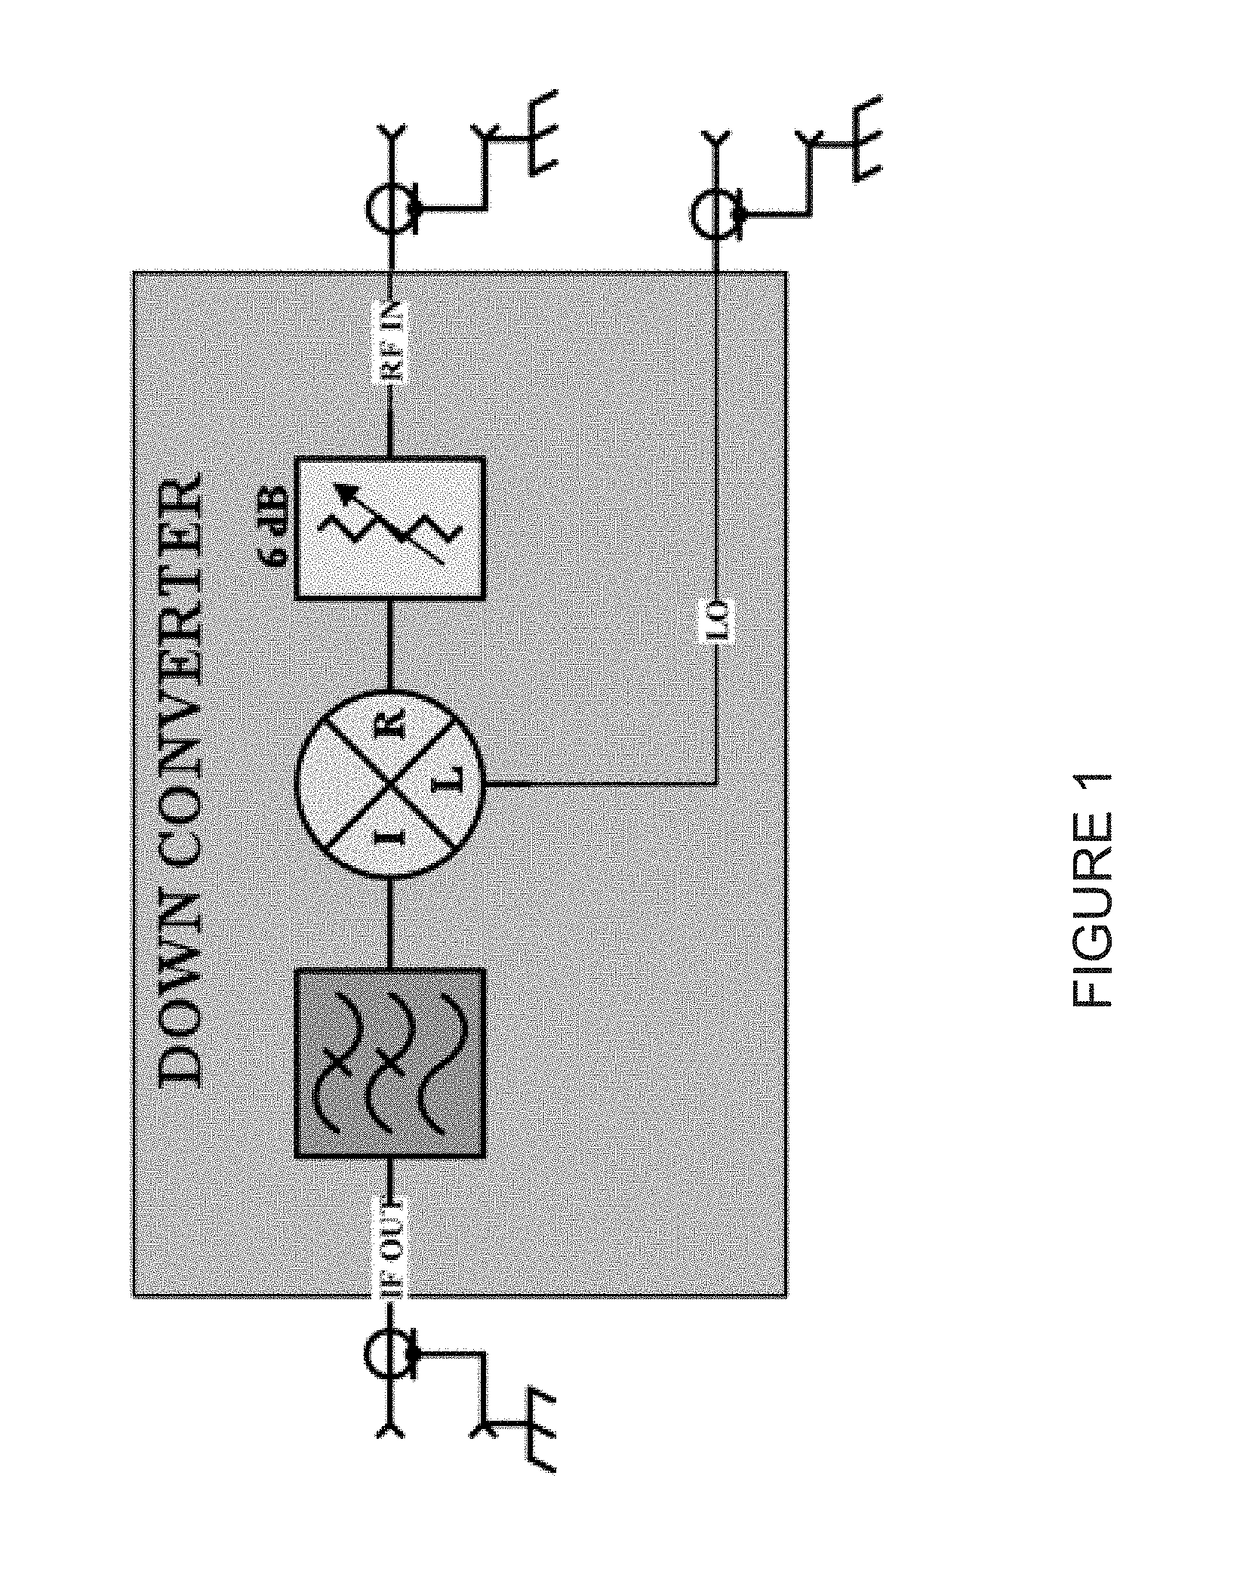 CHARACTERIZATION OF PHASE SHIFTER CIRCUITRY IN INTEGRATED CIRCUITS (ICs) USING STANDARD AUTOMATED TEST EQUIPMENT (ATE)